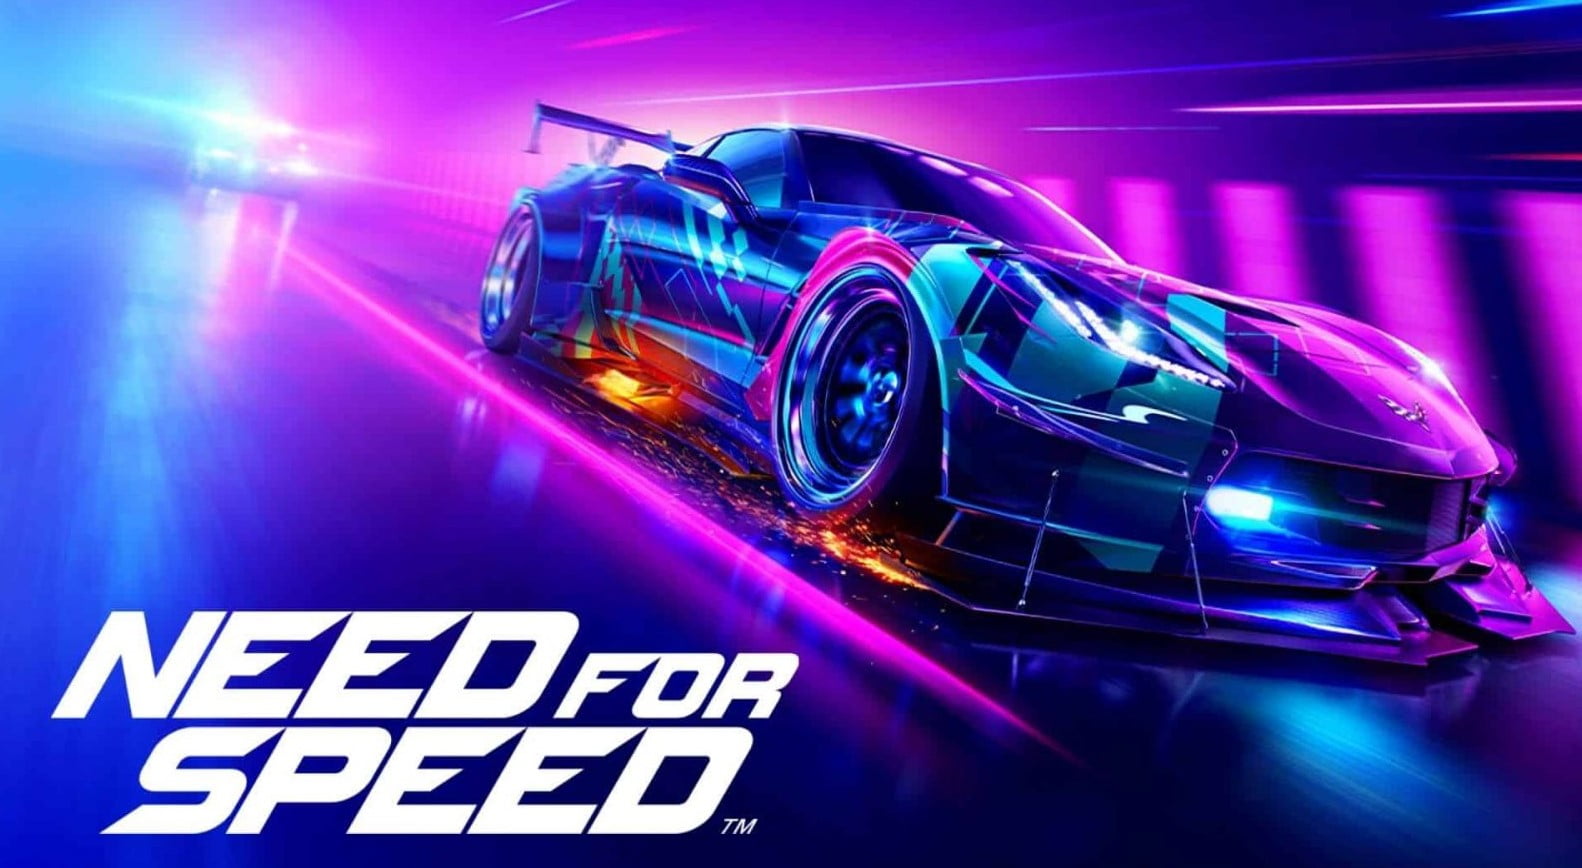 Need for Speed on Mac